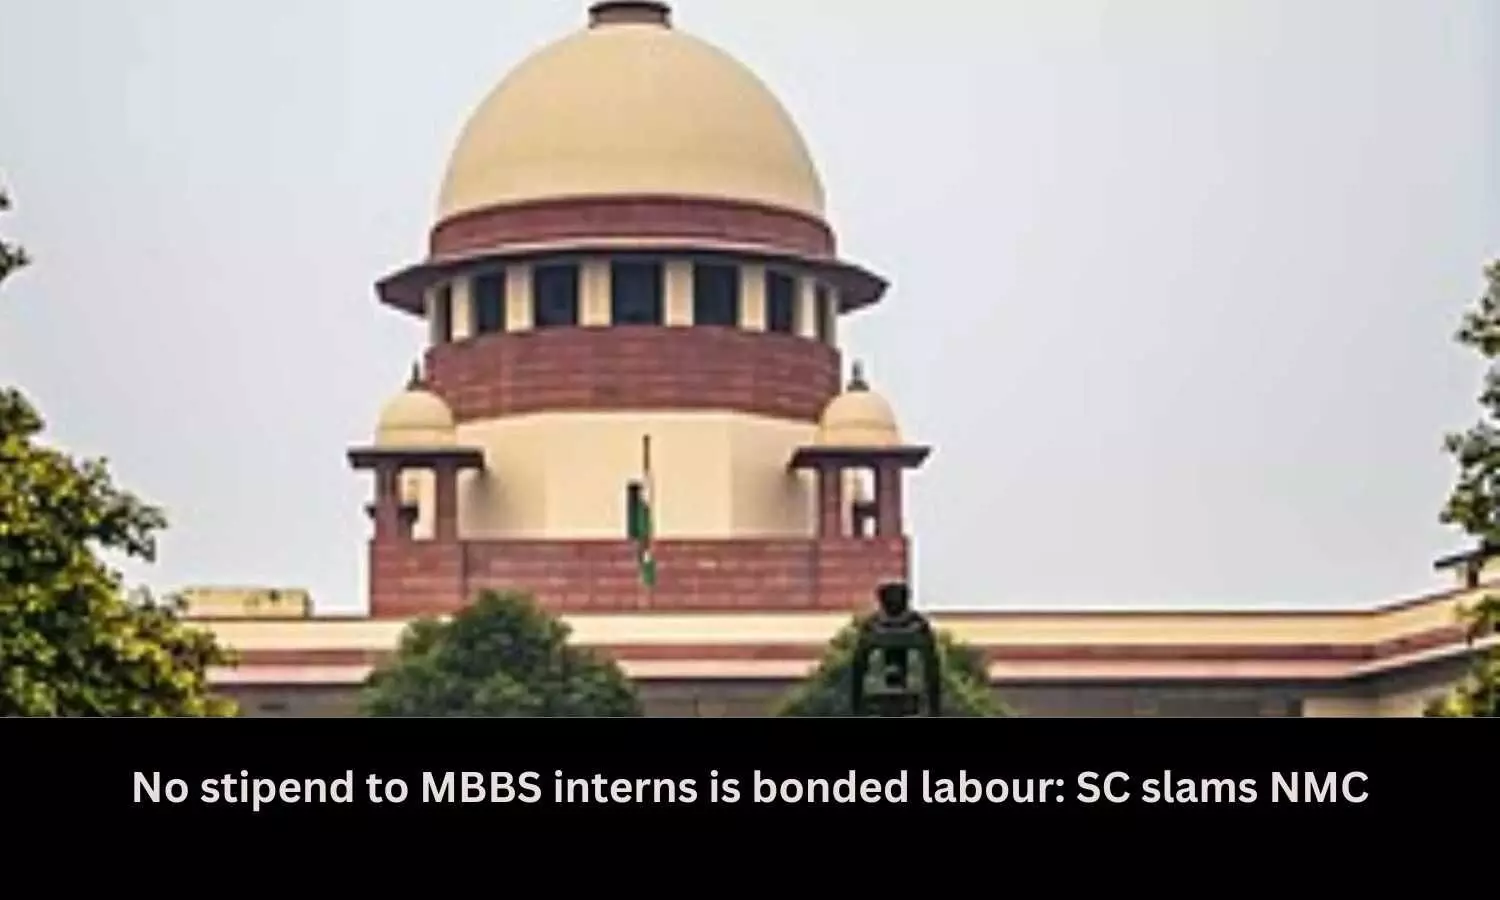 SC slams NMC over non payment of stipends to MBBS interns